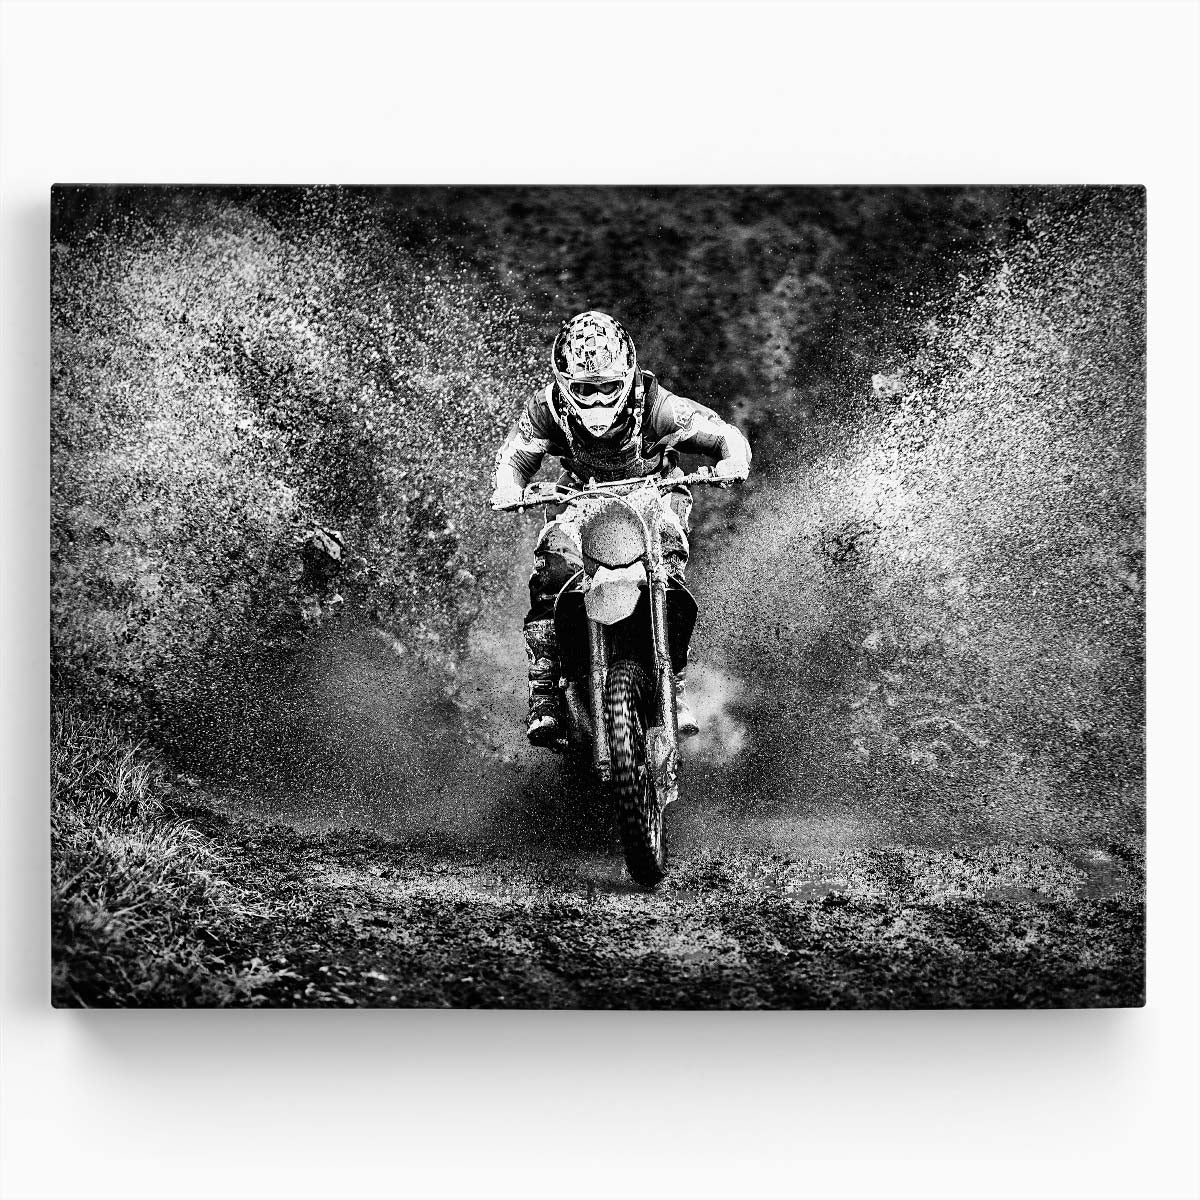 Extreme Motocross Racing Dramatic Monochrome Photography Wall Art by Luxuriance Designs. Made in USA.